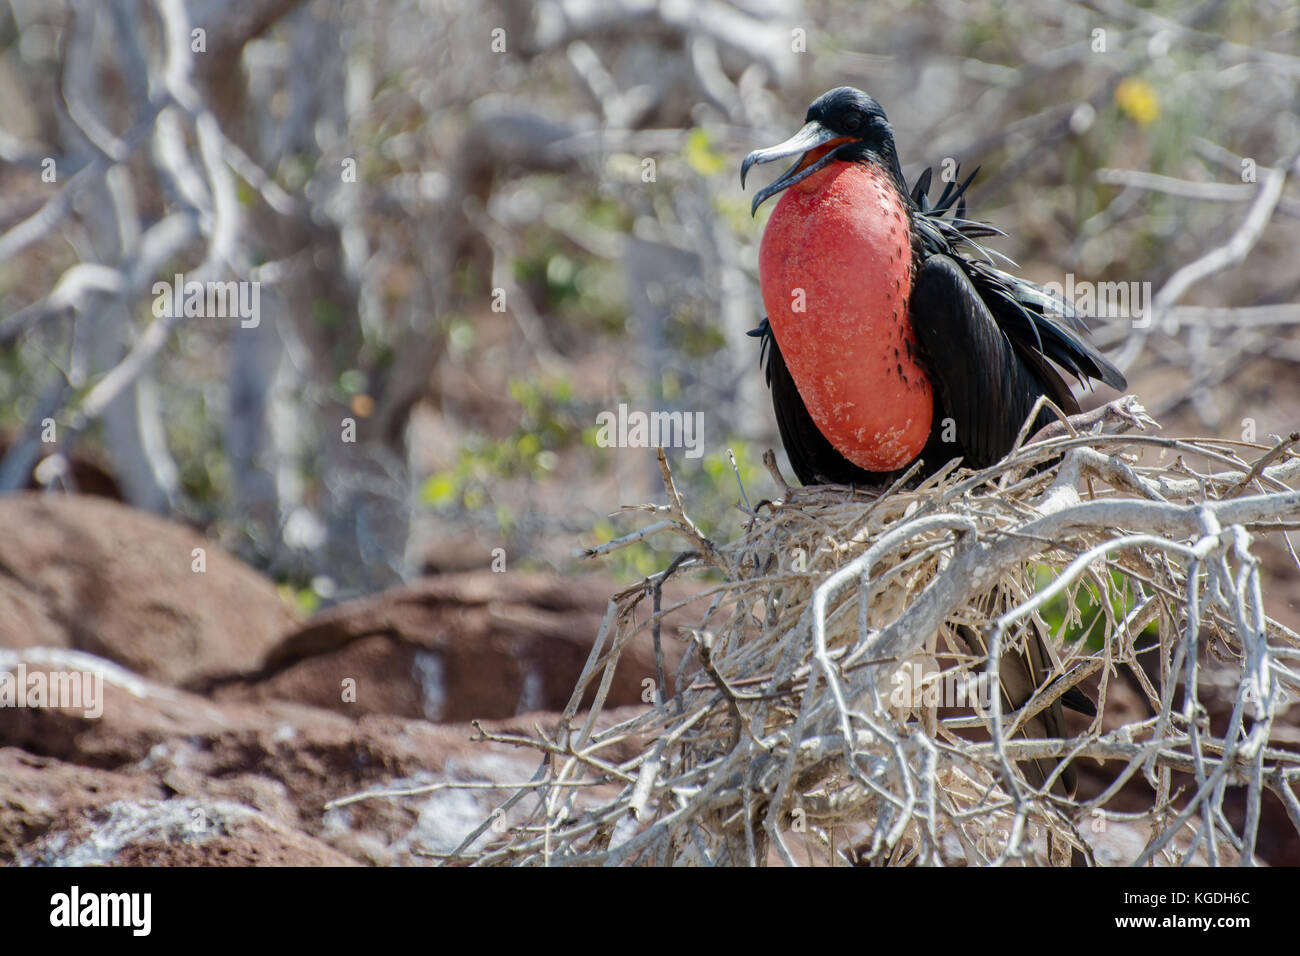 A male frigate bird inflates his bright red throat patch to attract females. Stock Photo